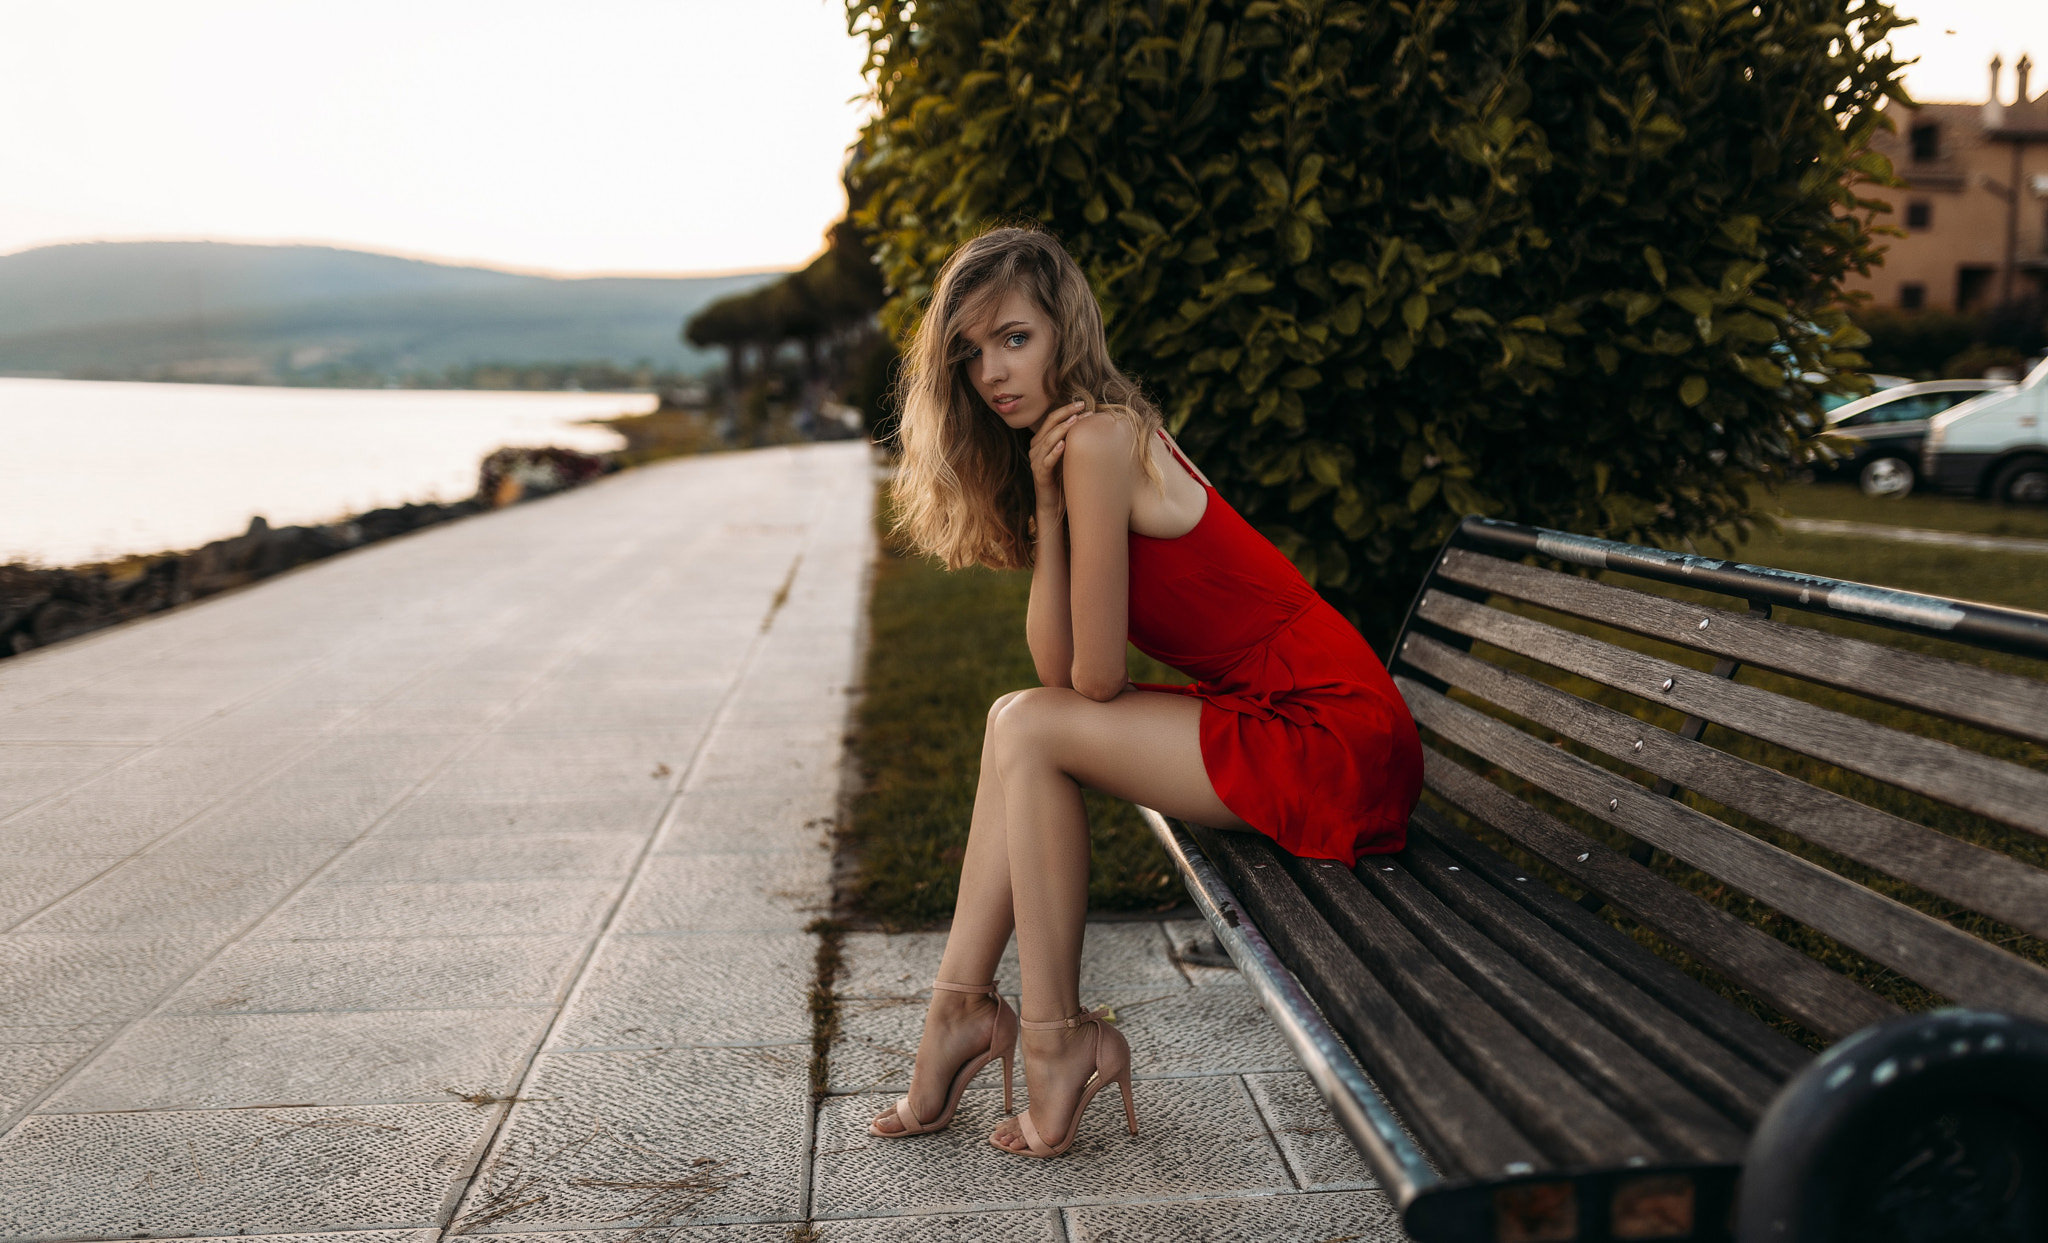 A beautiful model in a red dress sits on a bench